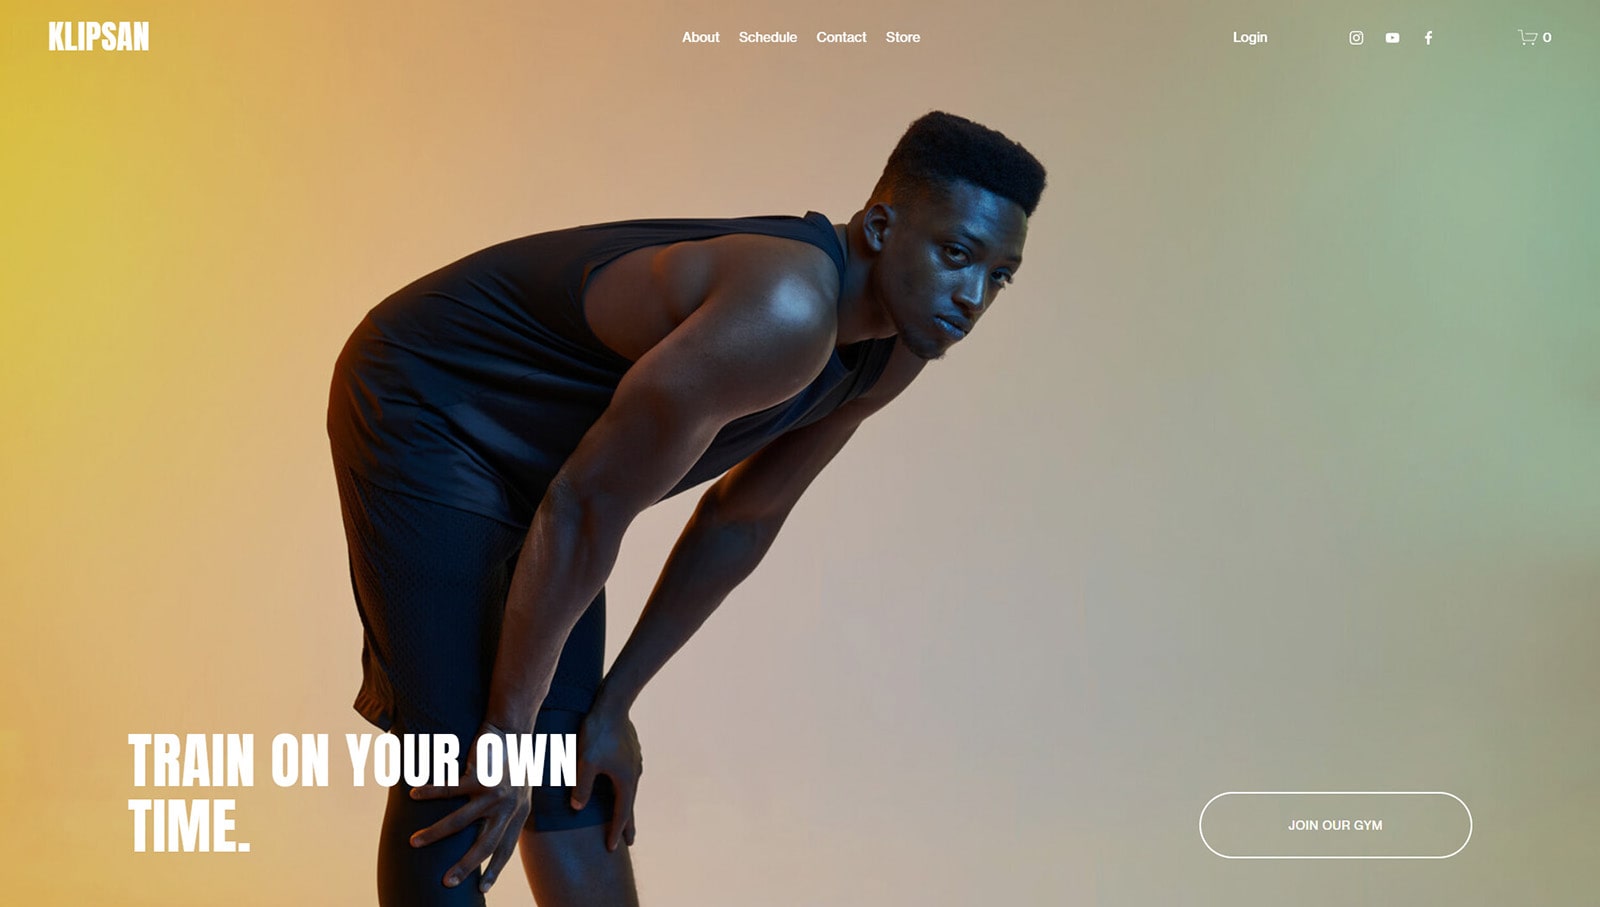 View of Klipsan, a Squarespace template offering a robust gym website design.